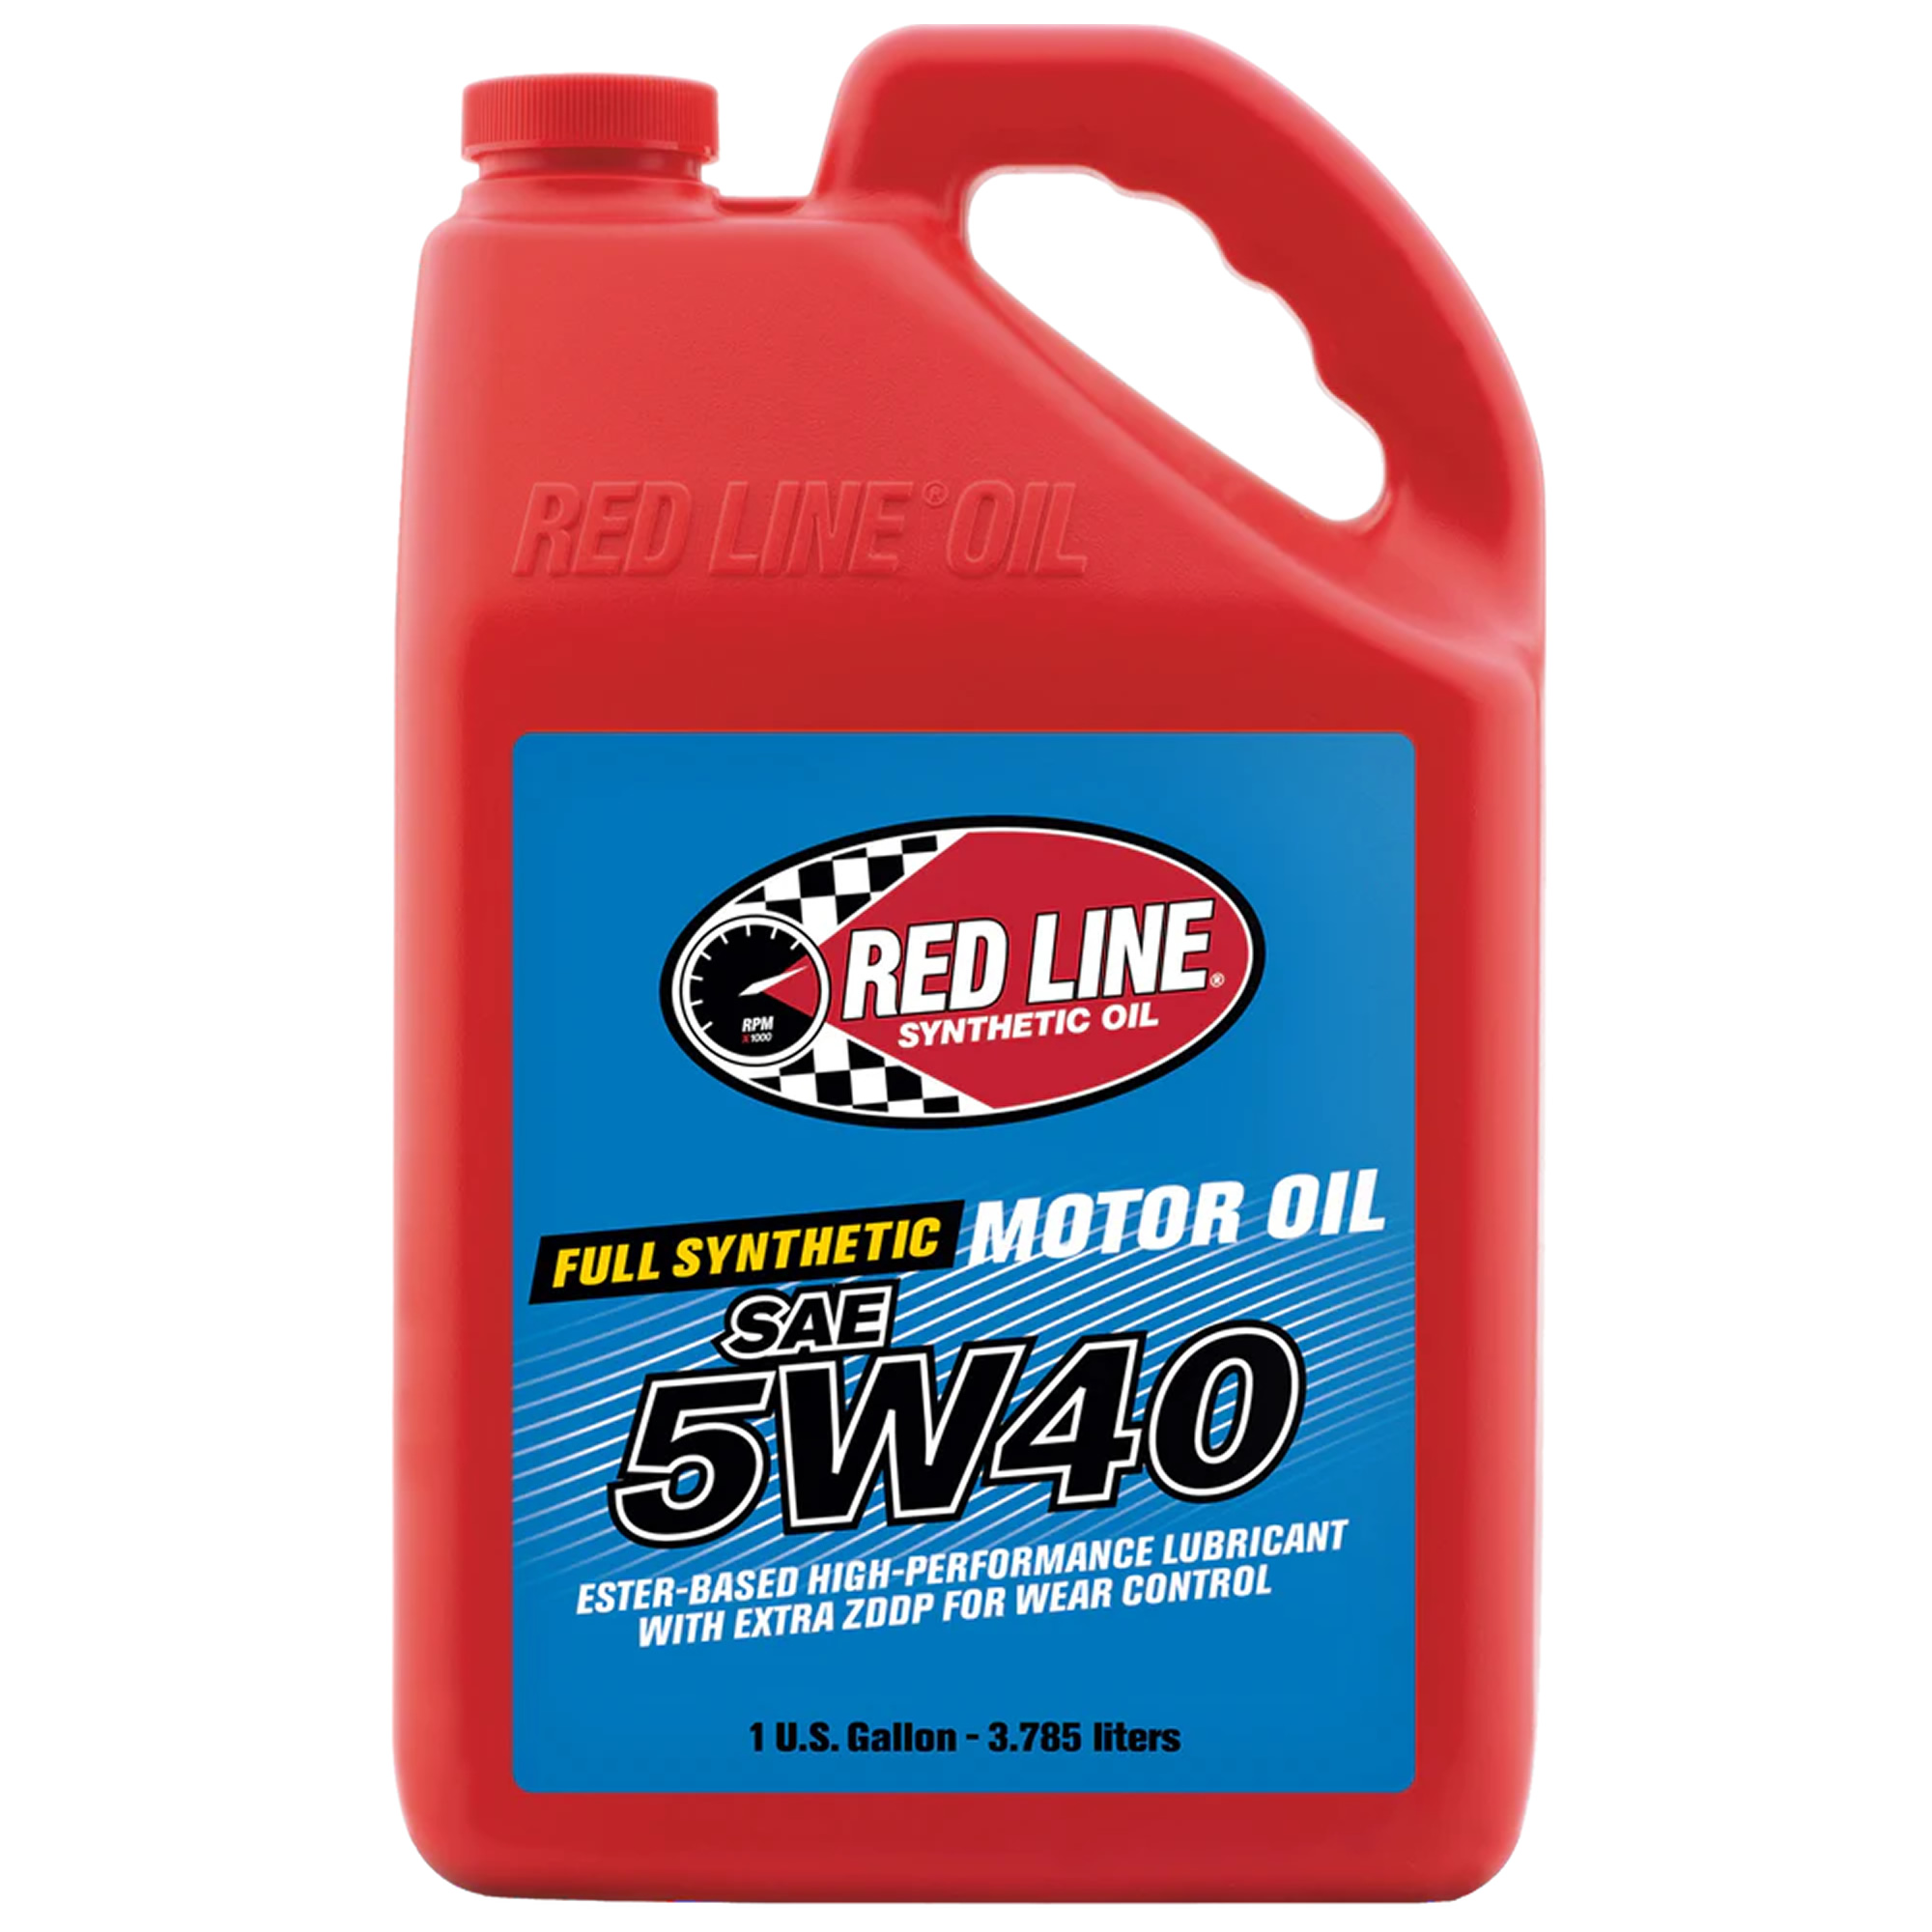 Red Line 5W40 High Performance Engine Oil